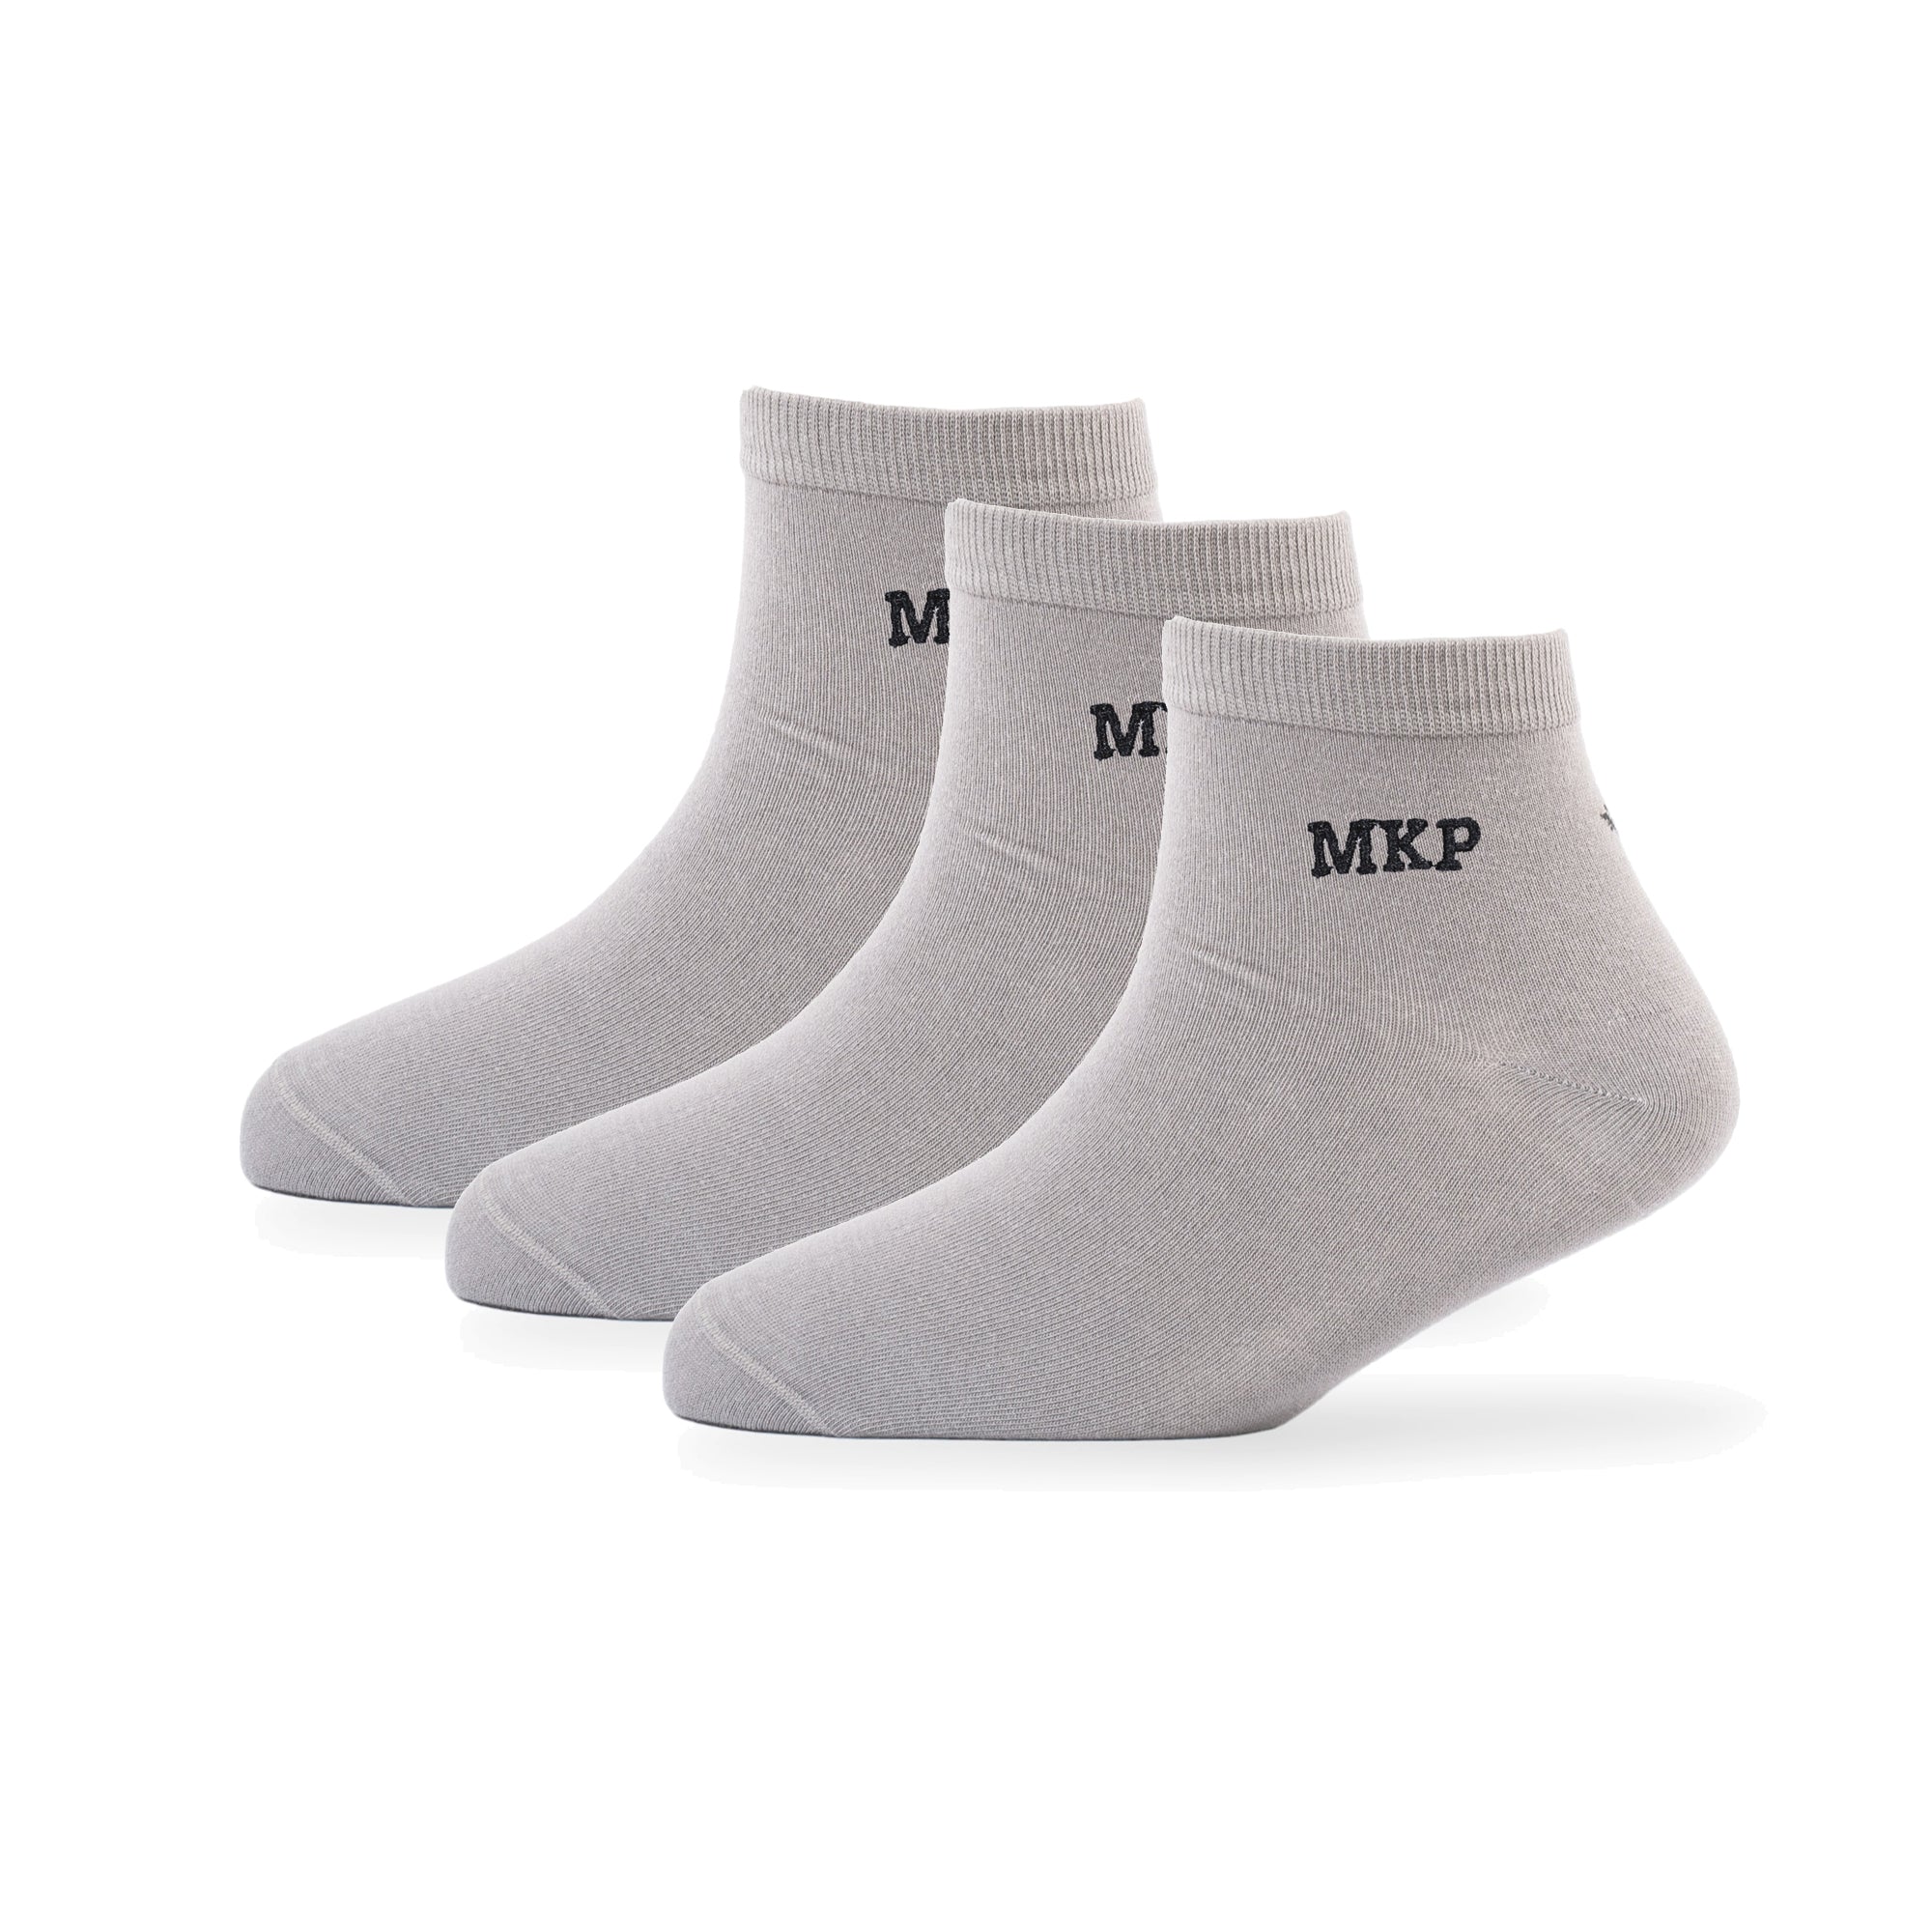 Young Wings Men's Monogram Ankle Length Socks, Colour Grey - Pack of 3 Pairs, Style no. 2595-M3